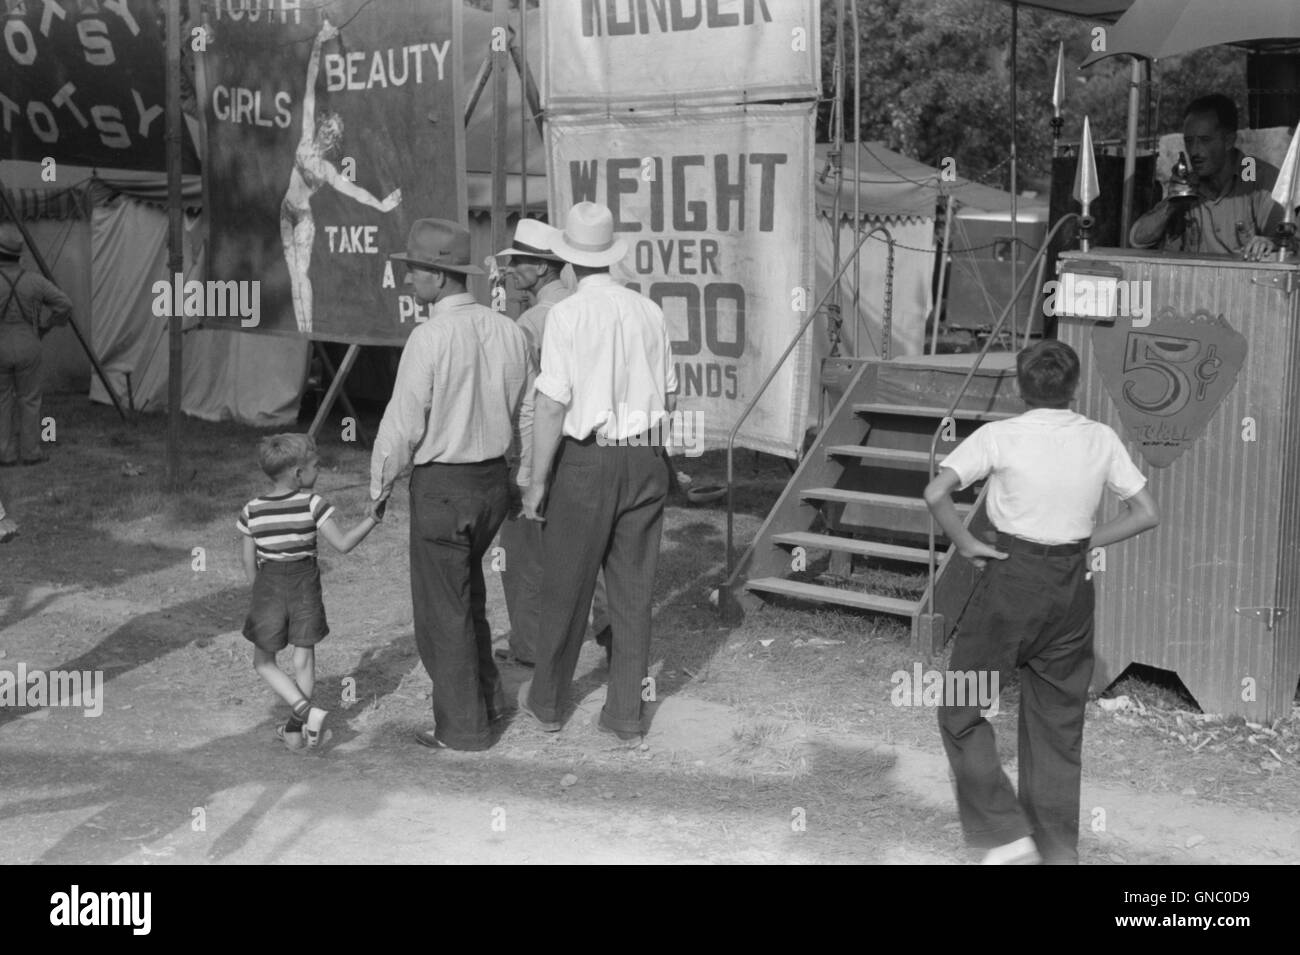 Group of Men and Children at Midway and Carnival, Shelby County Fair and Horse Show, Shelbyville, Kentucky, USA, Marion Post Wolcott, U.S. Farm Security Administration, August 1940 Stock Photo